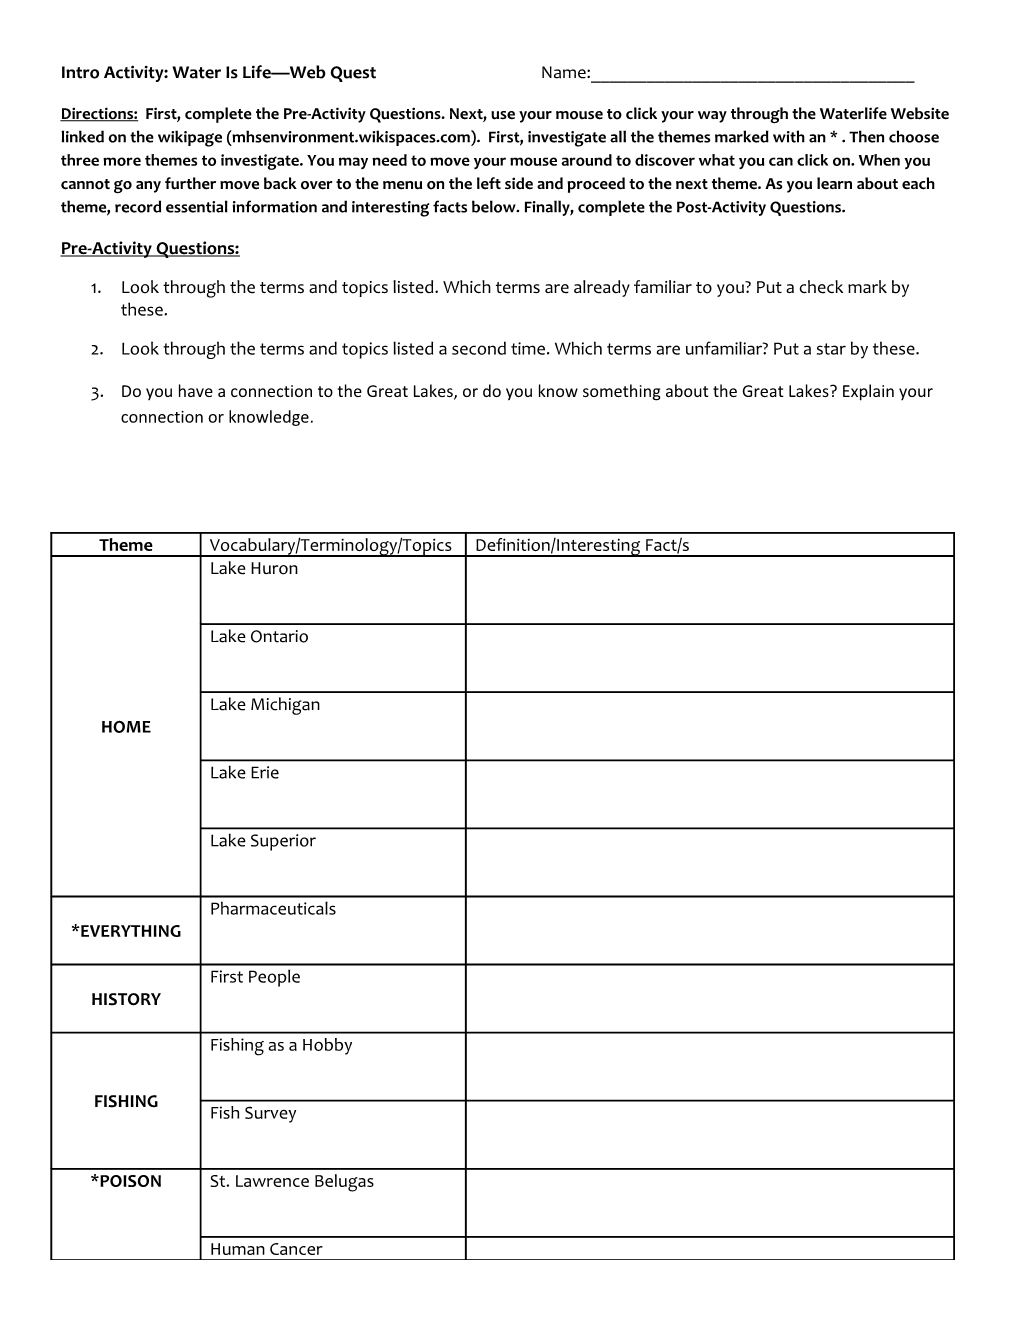 Intro Activity: Water Is Life Web Quest